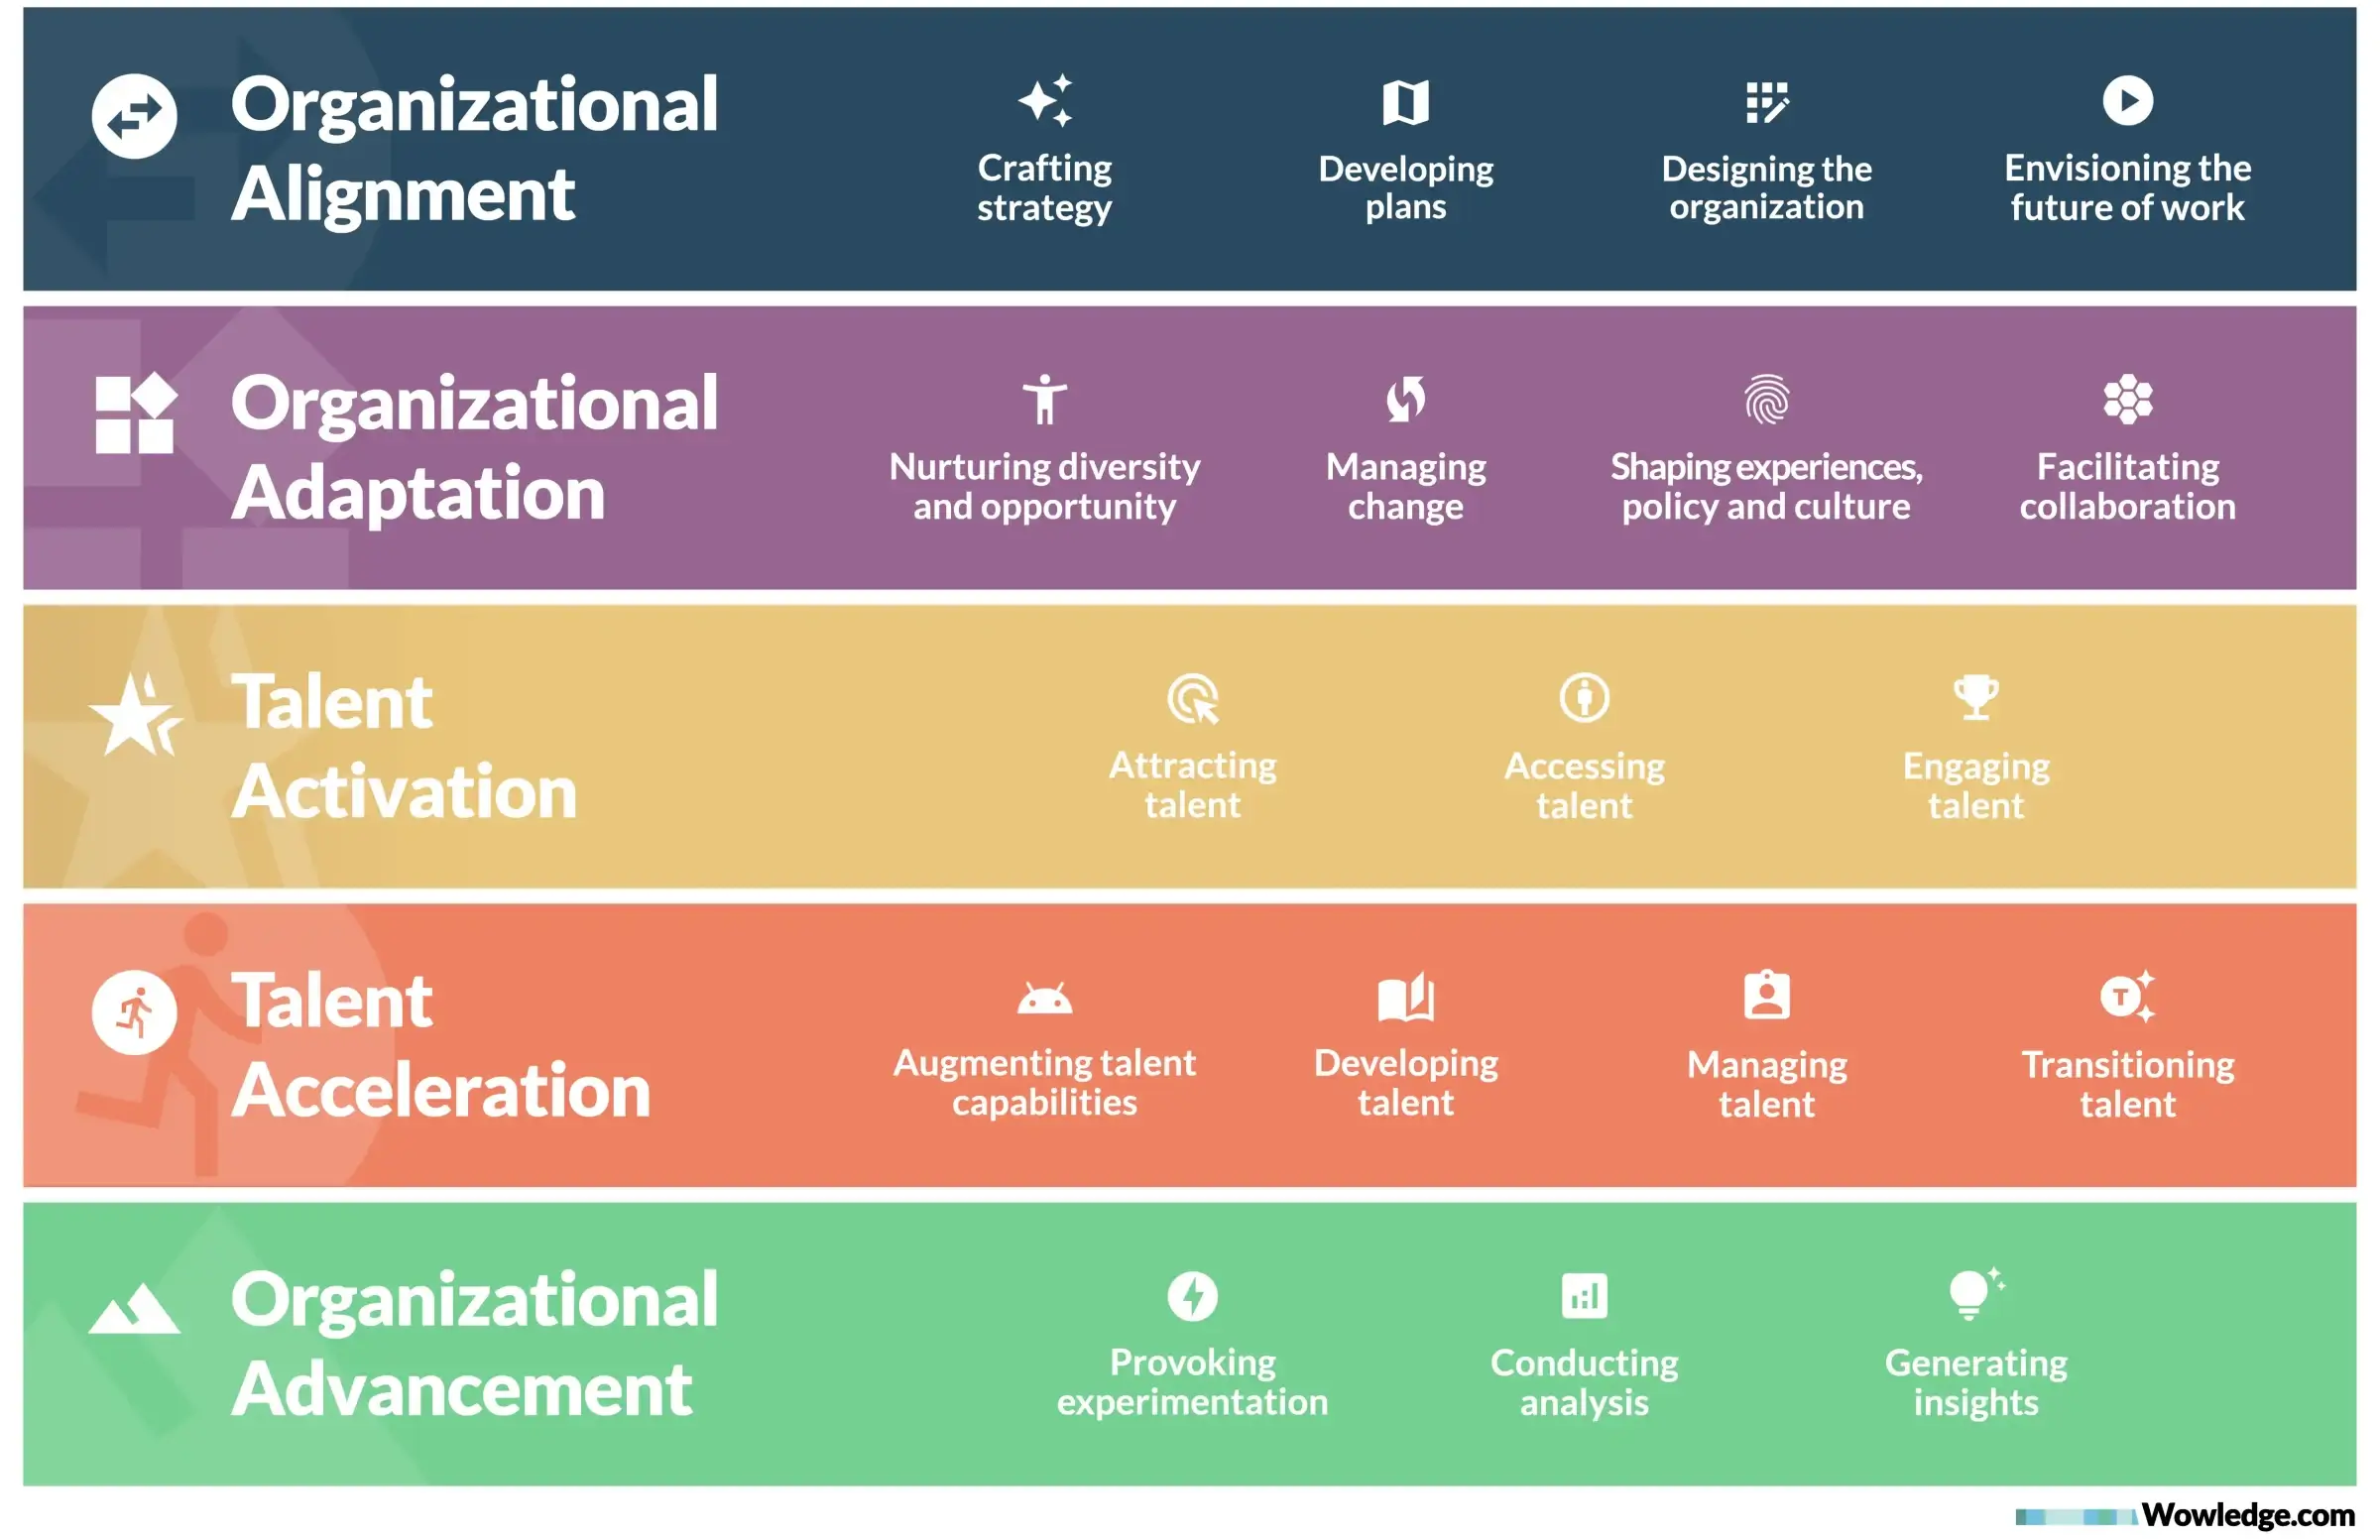 Wowledge's integrated talent and organizational sustainment framework